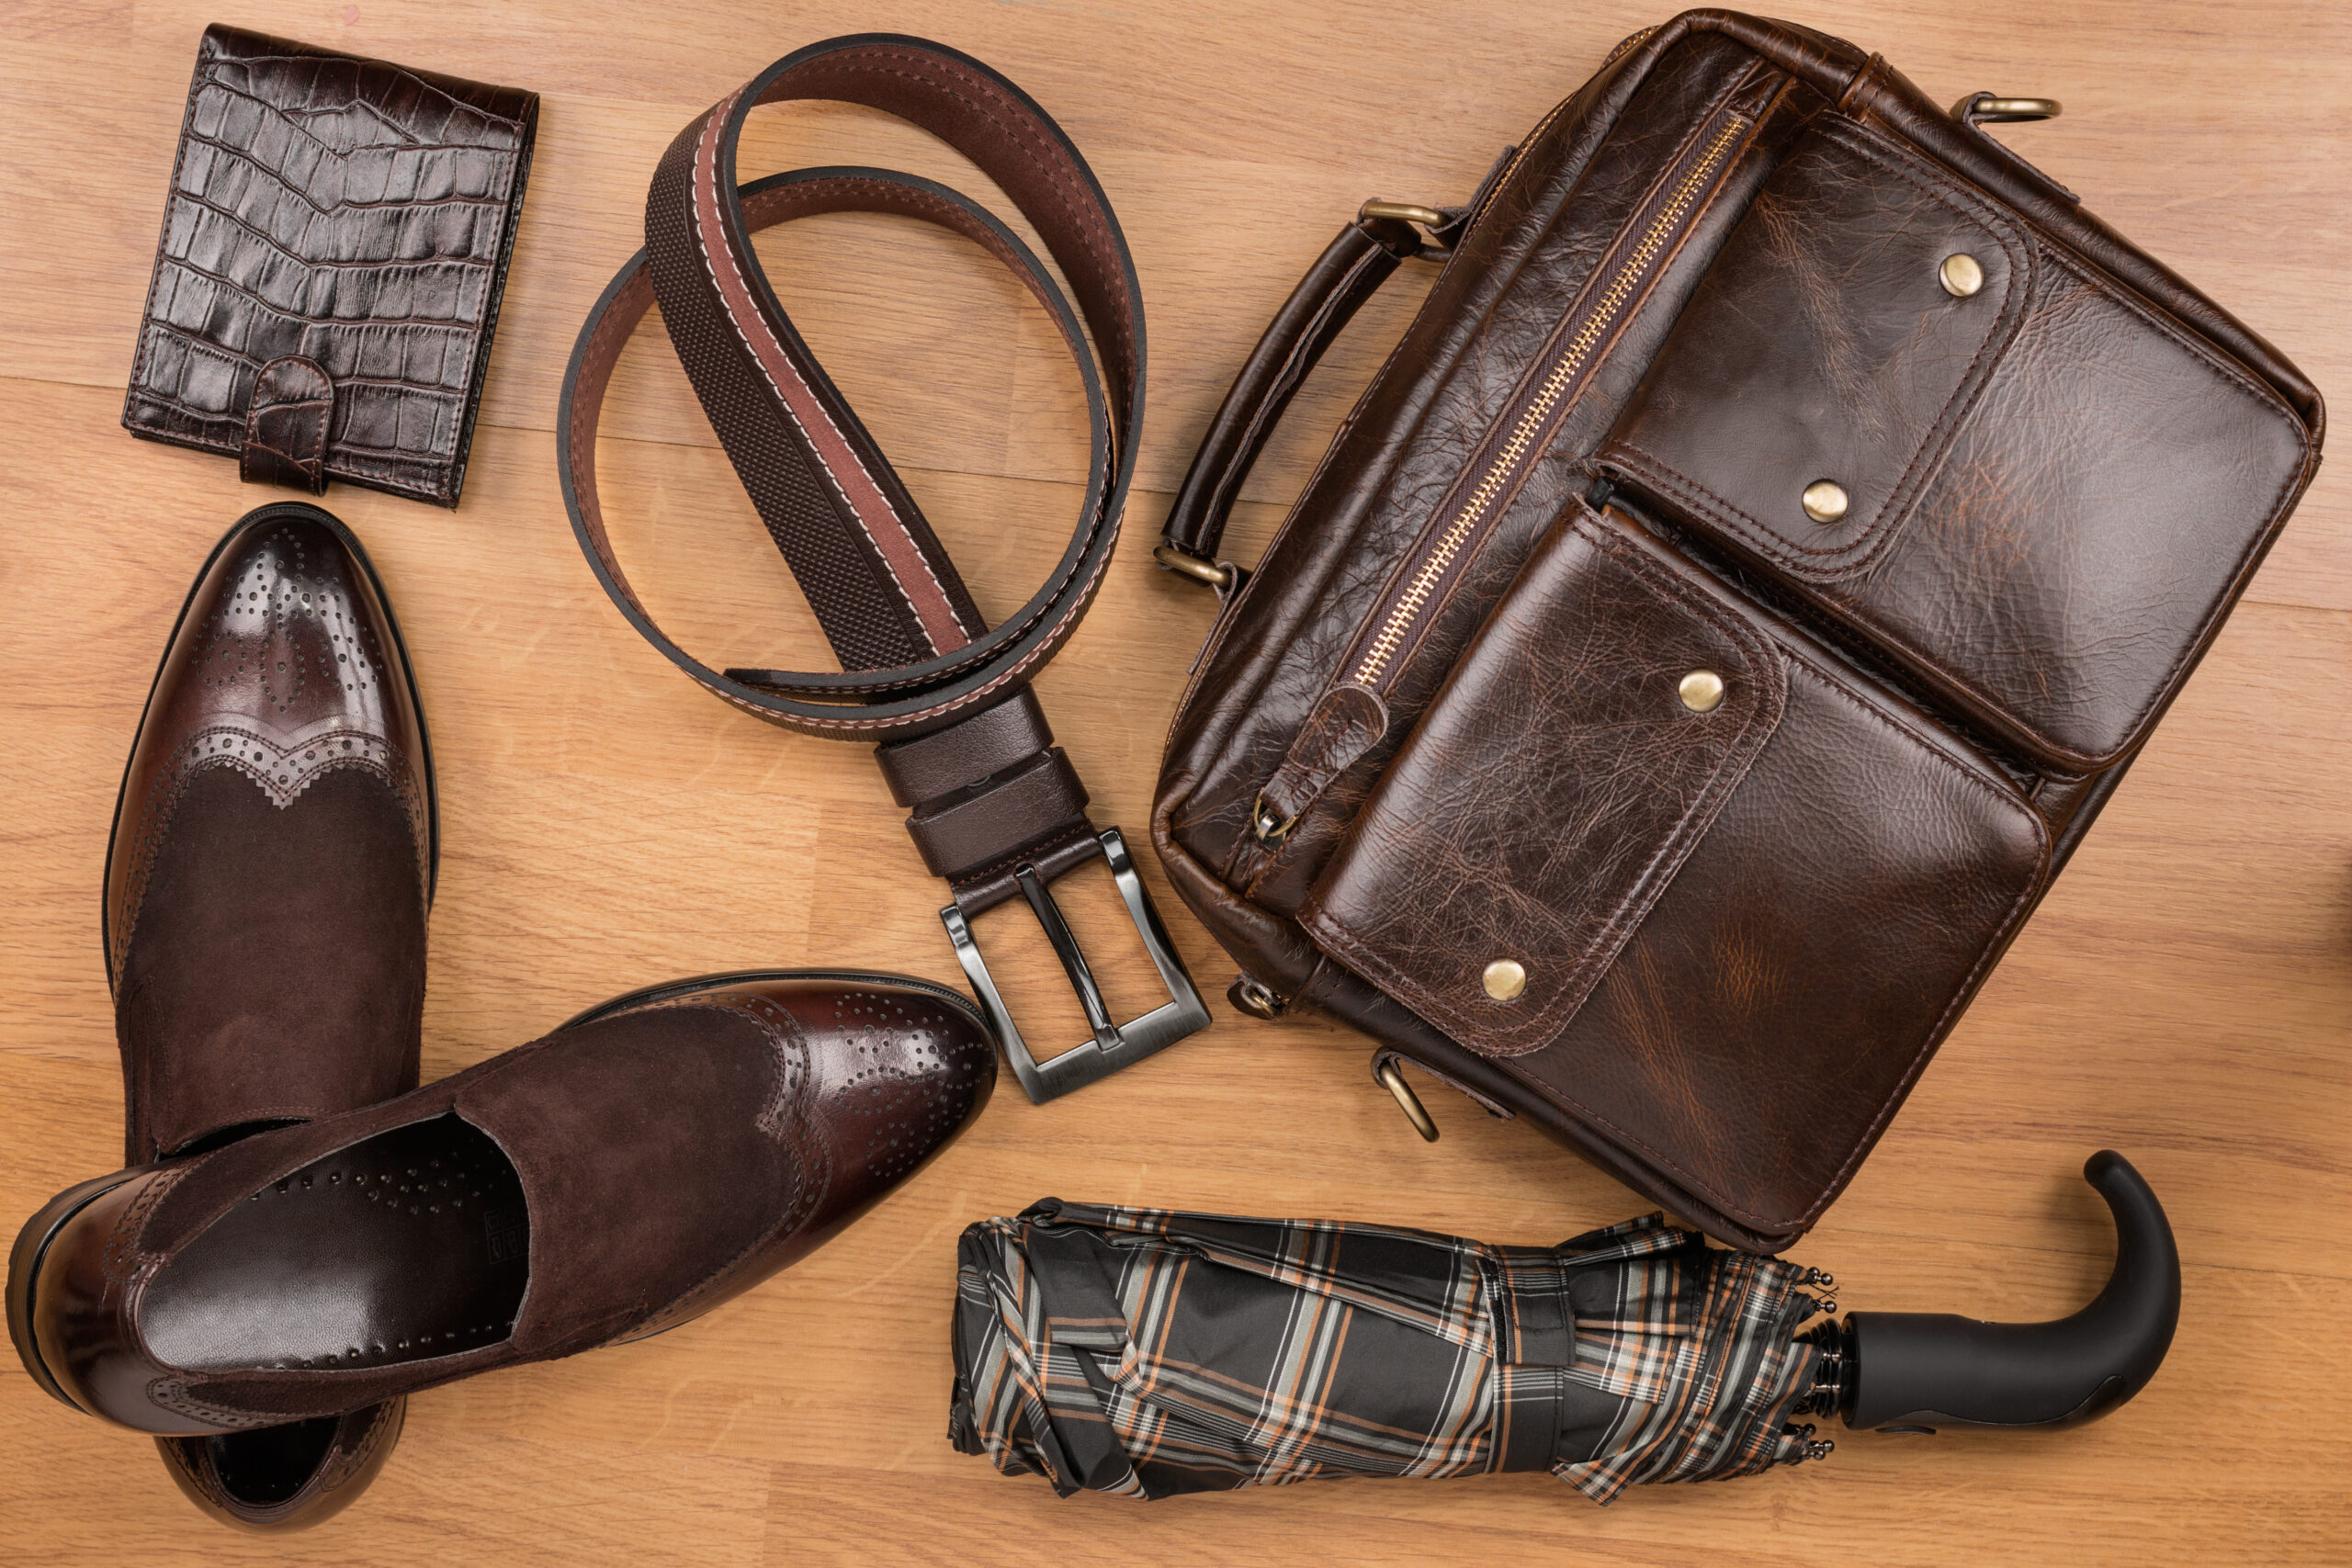 Classic brown shoes, briefcase, belt and umbrella on the wooden floor, can be used as background